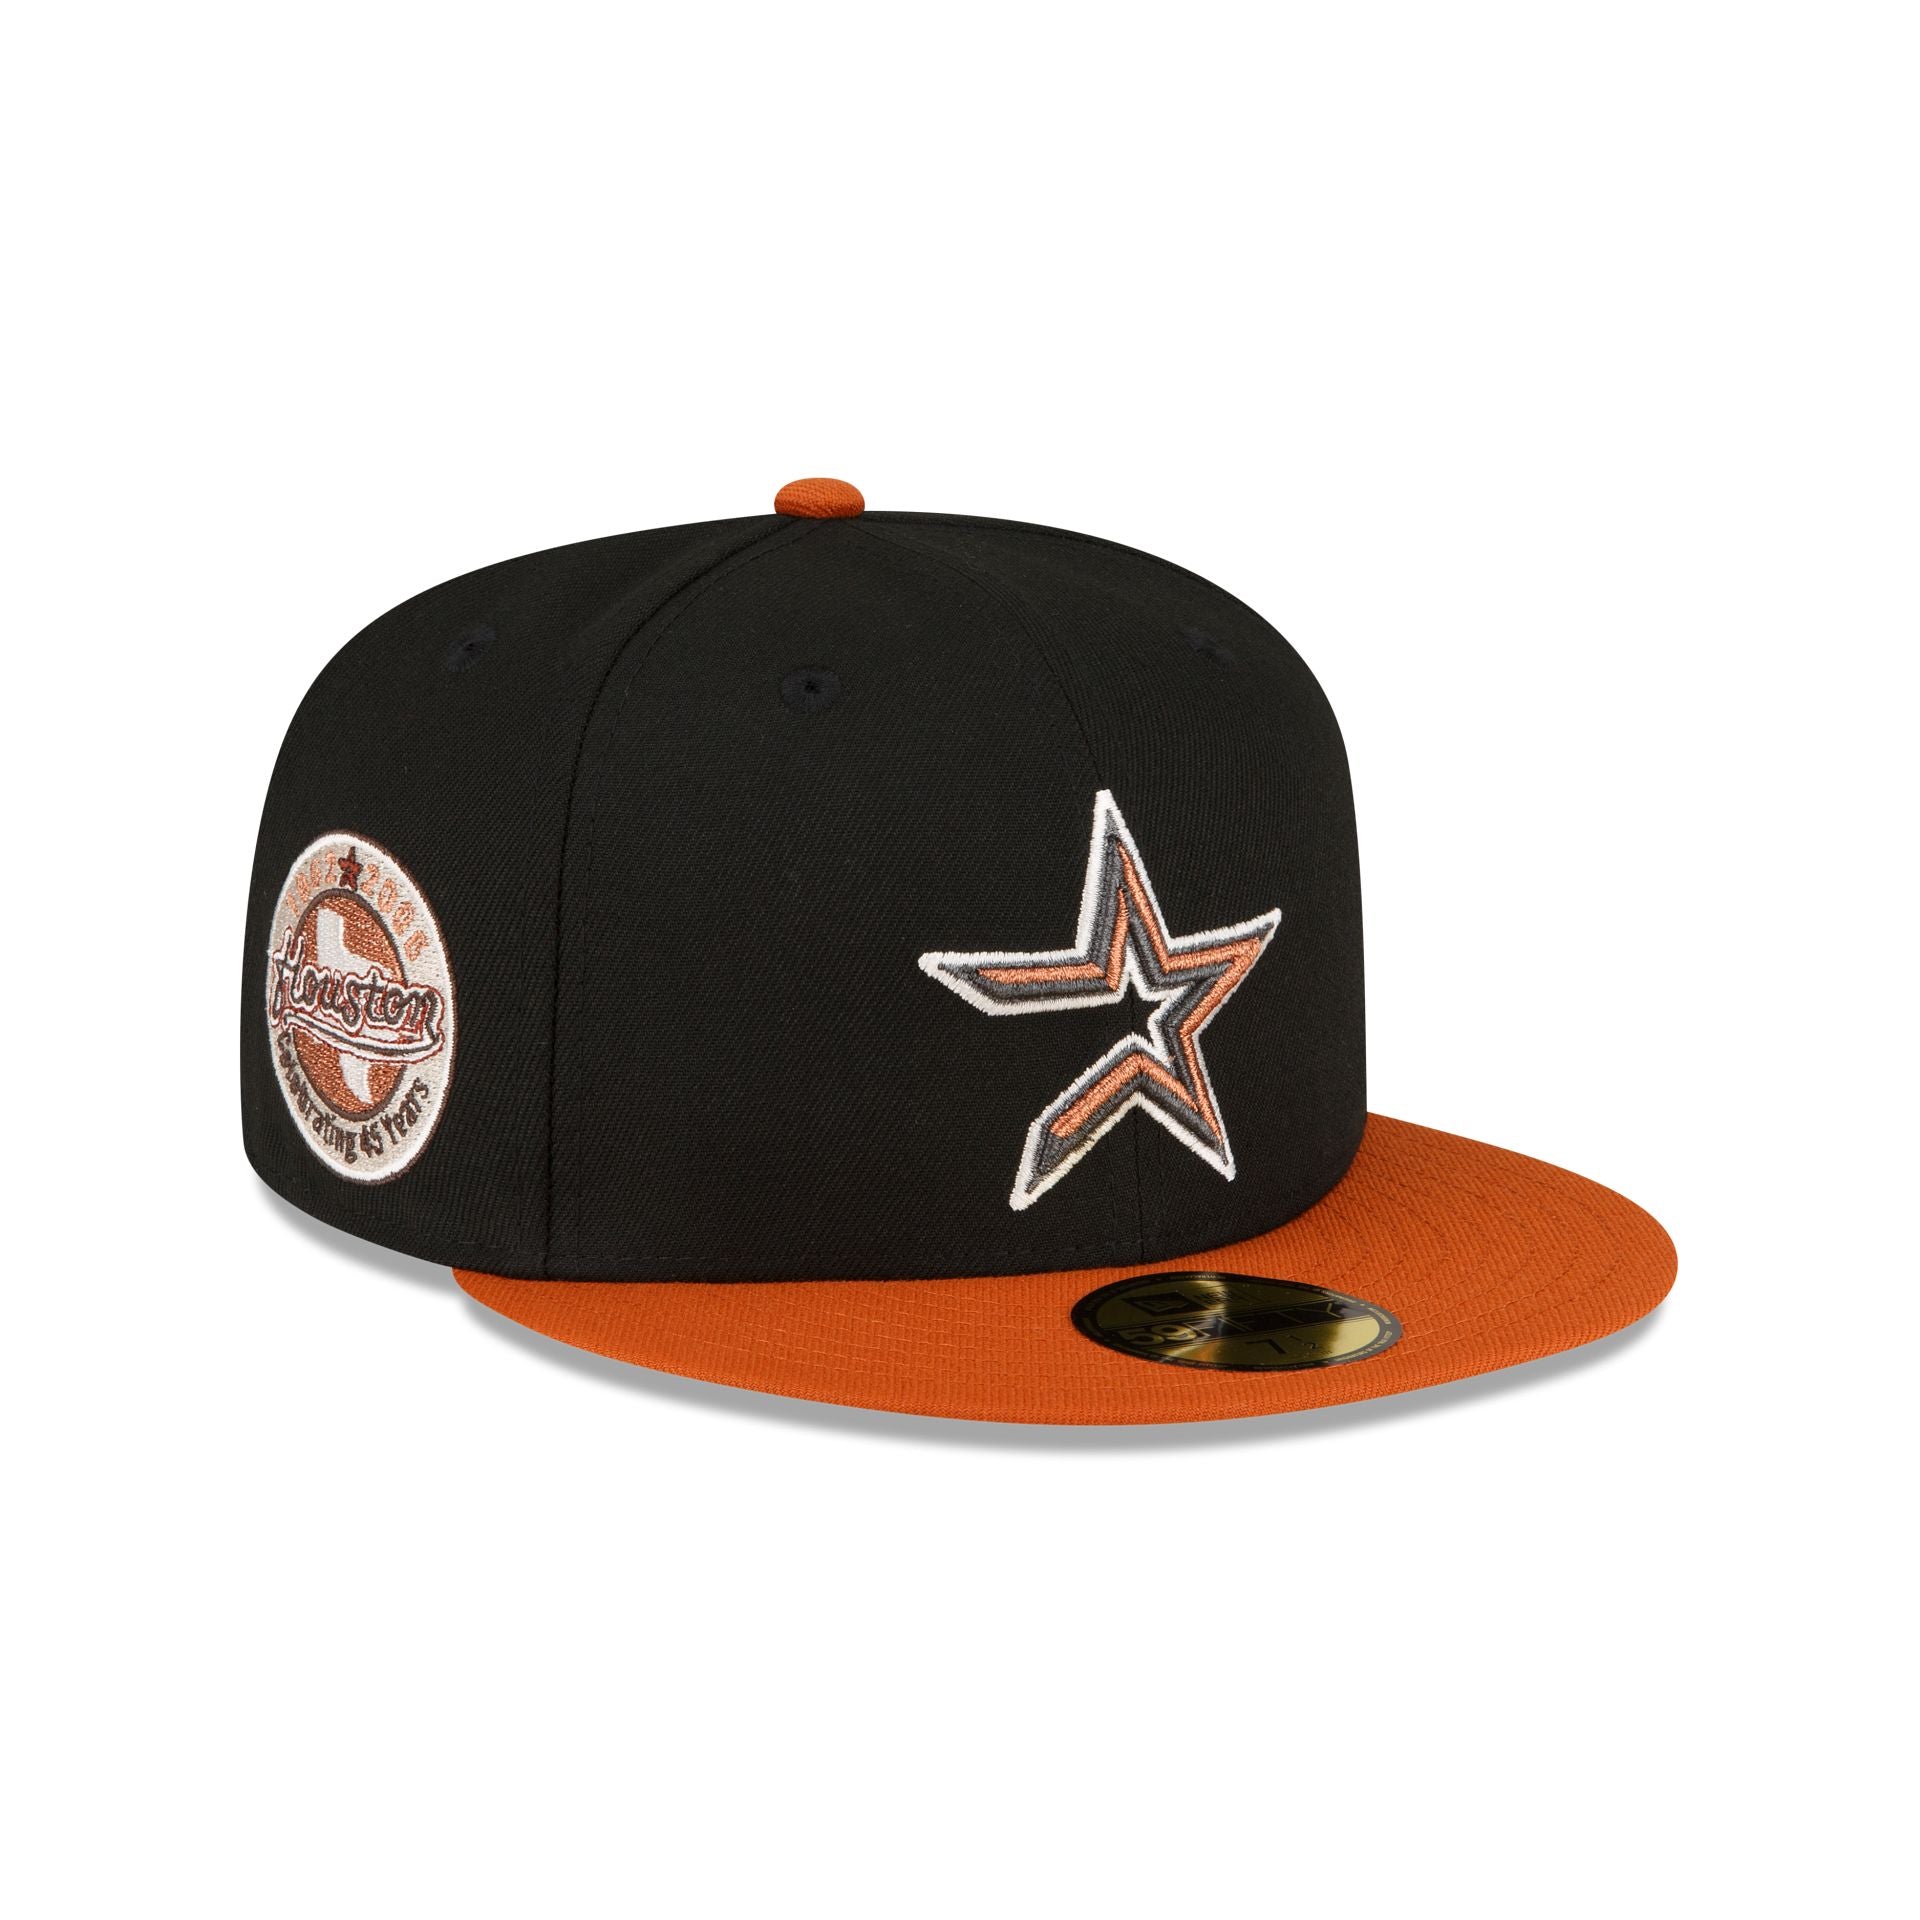 Just Caps Rust Orange Houston Astros 59FIFTY Fitted Hat, Black - Size: 7 5/8, MLB by New Era